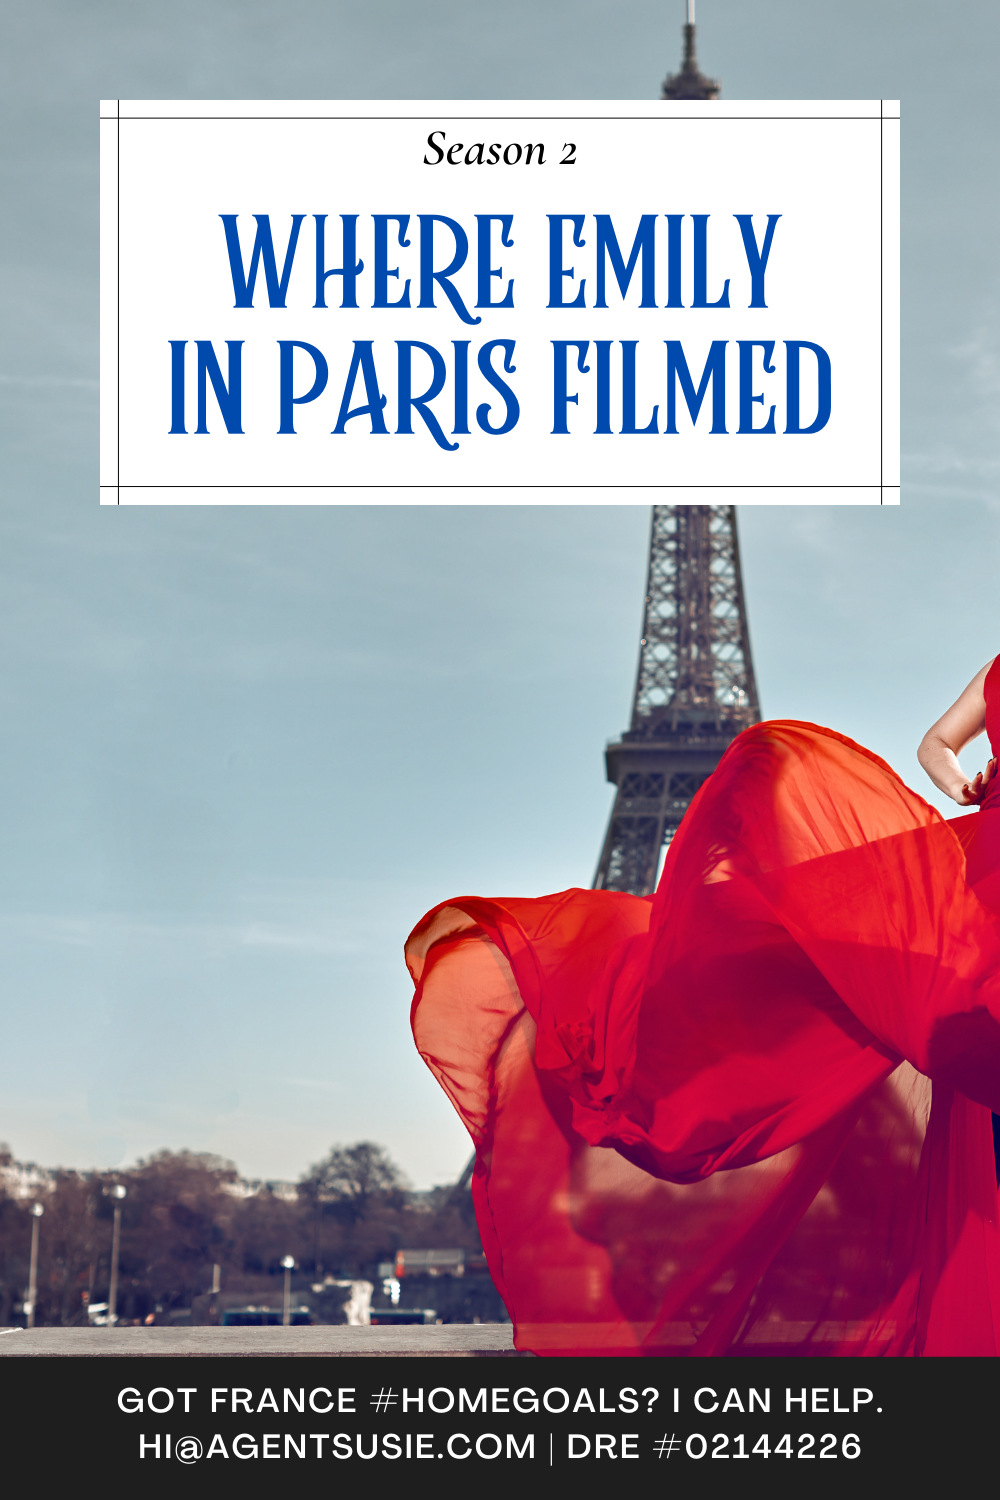 Emily in Paris season two filming locations